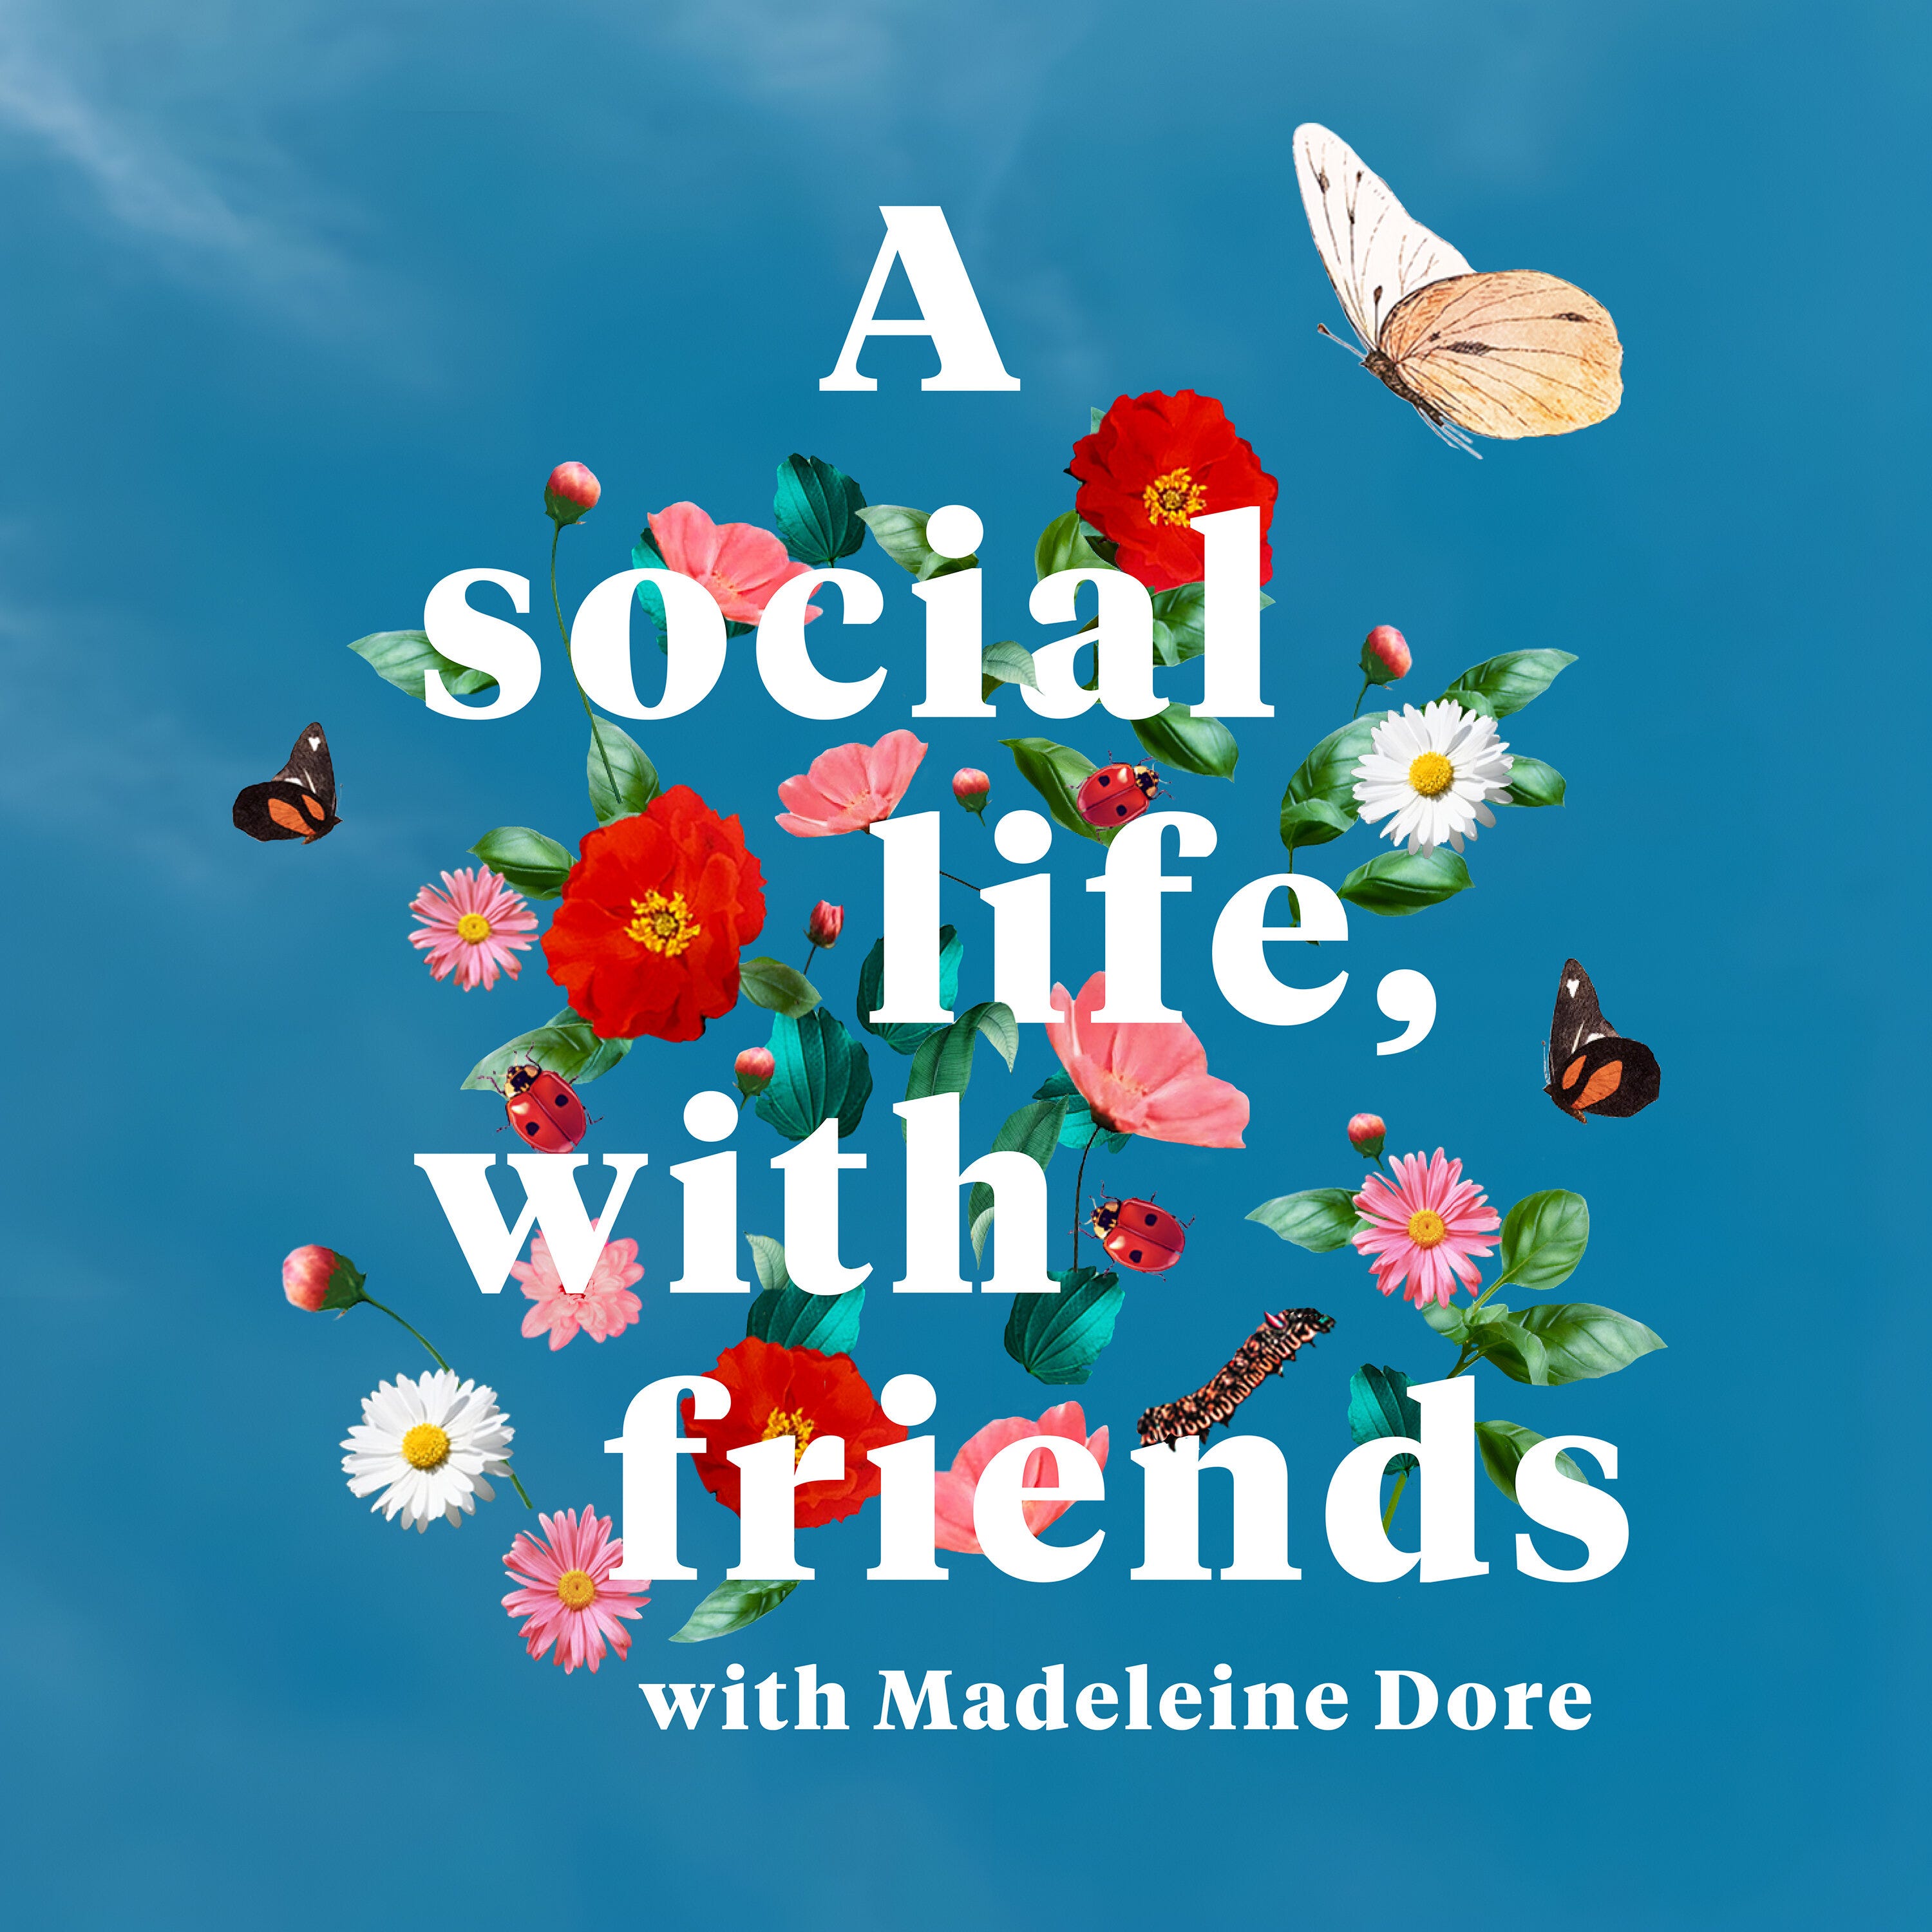 Introducing: A social life, with friends